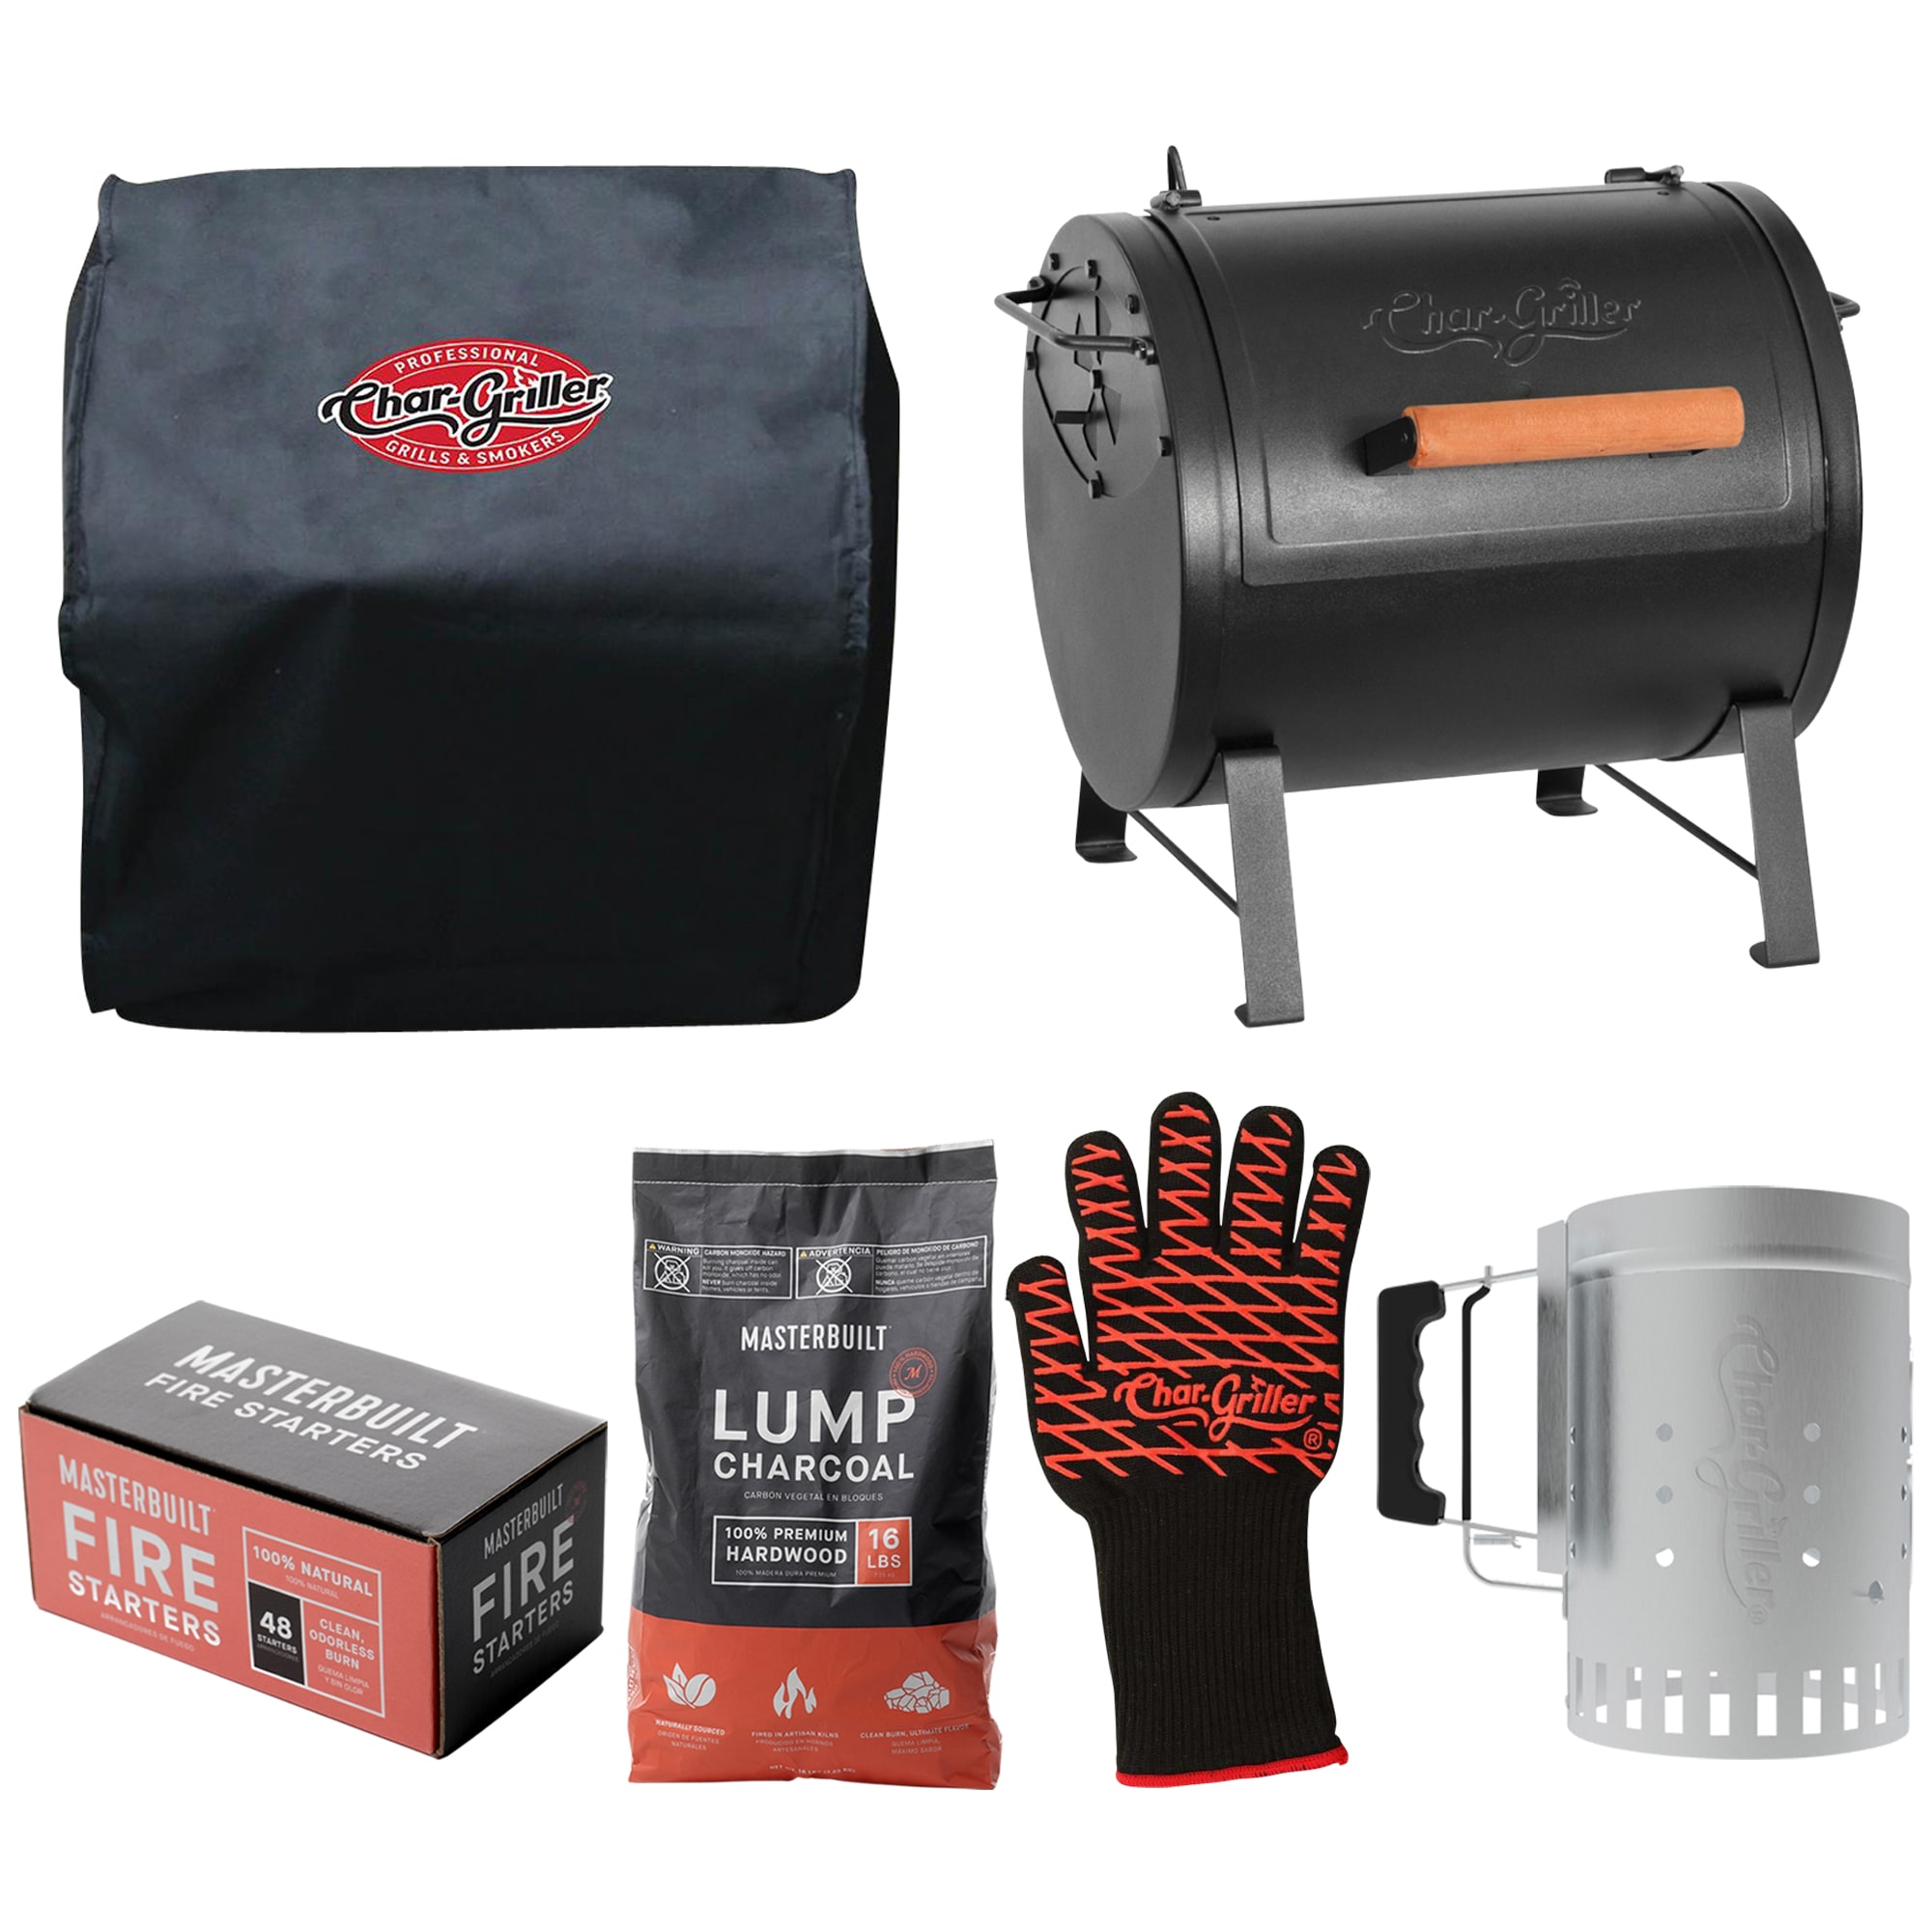 Cave Tools Grill Smoker Box Starter Kit for Wood Chips Stainless Steel Bucket Style with Hinged Lid BBQ Grill and Smoker Accessories - Large